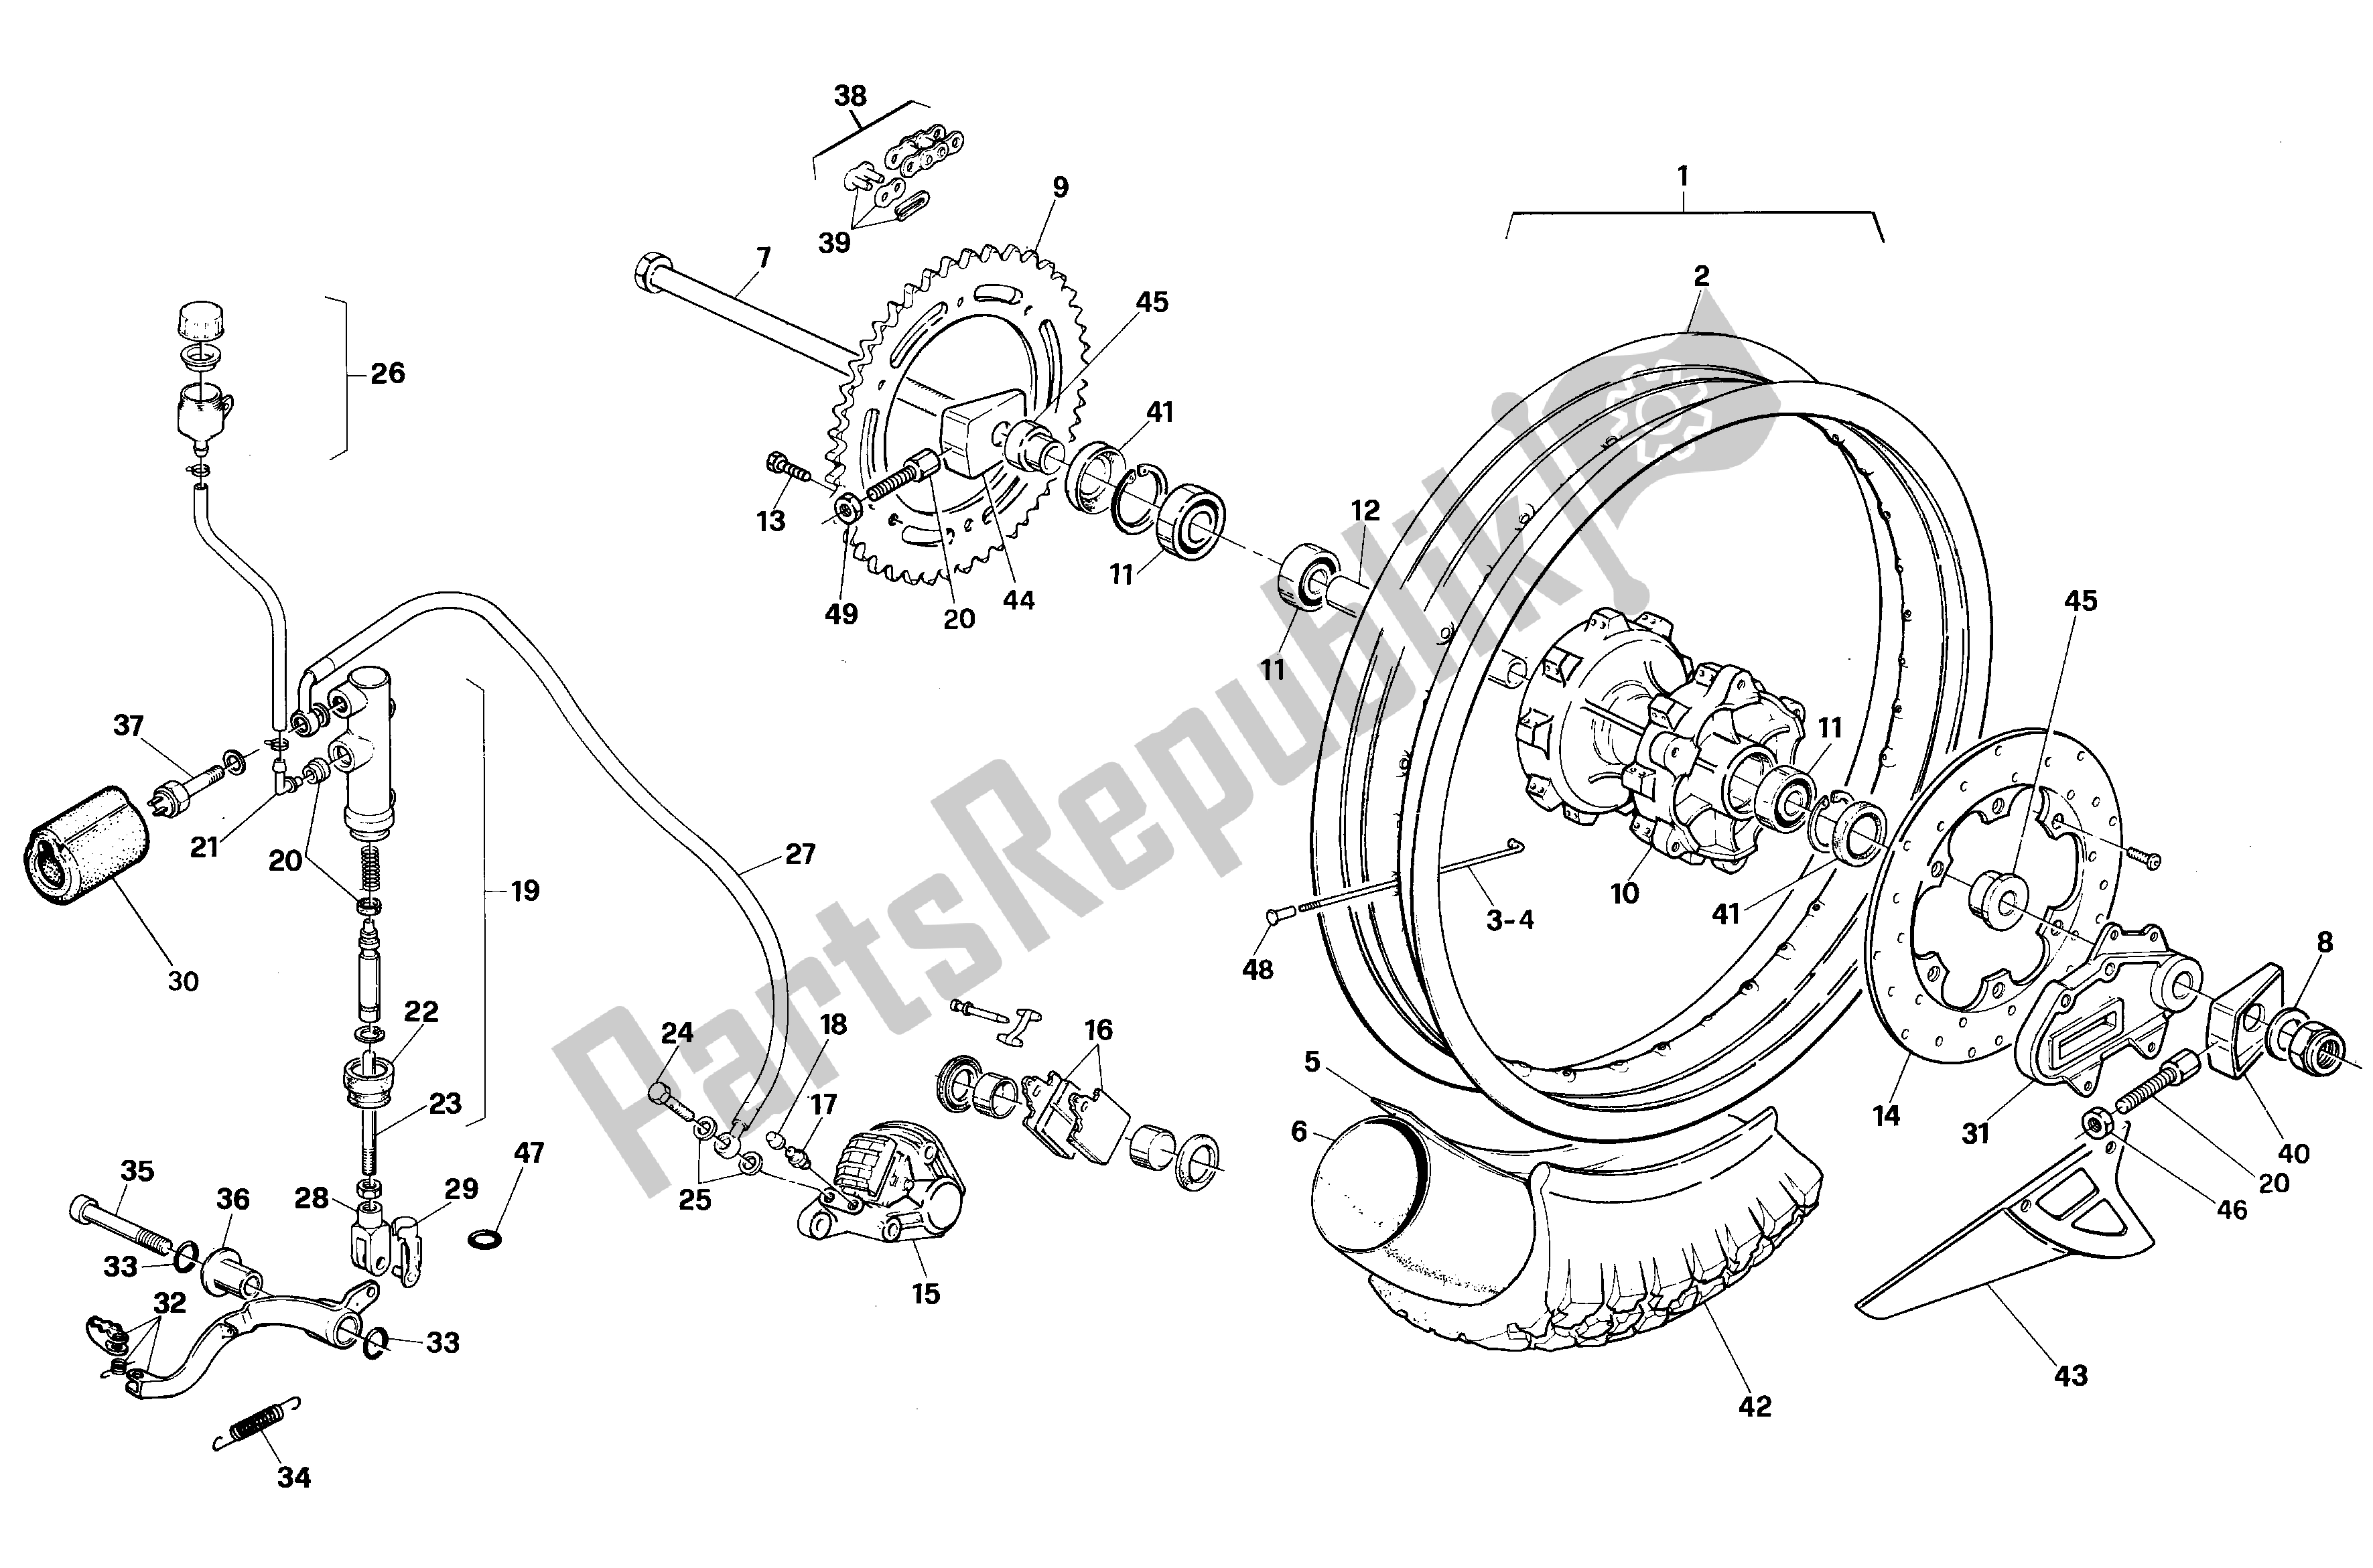 All parts for the Rear Wheel of the Aprilia RX 125 1989 - 1993